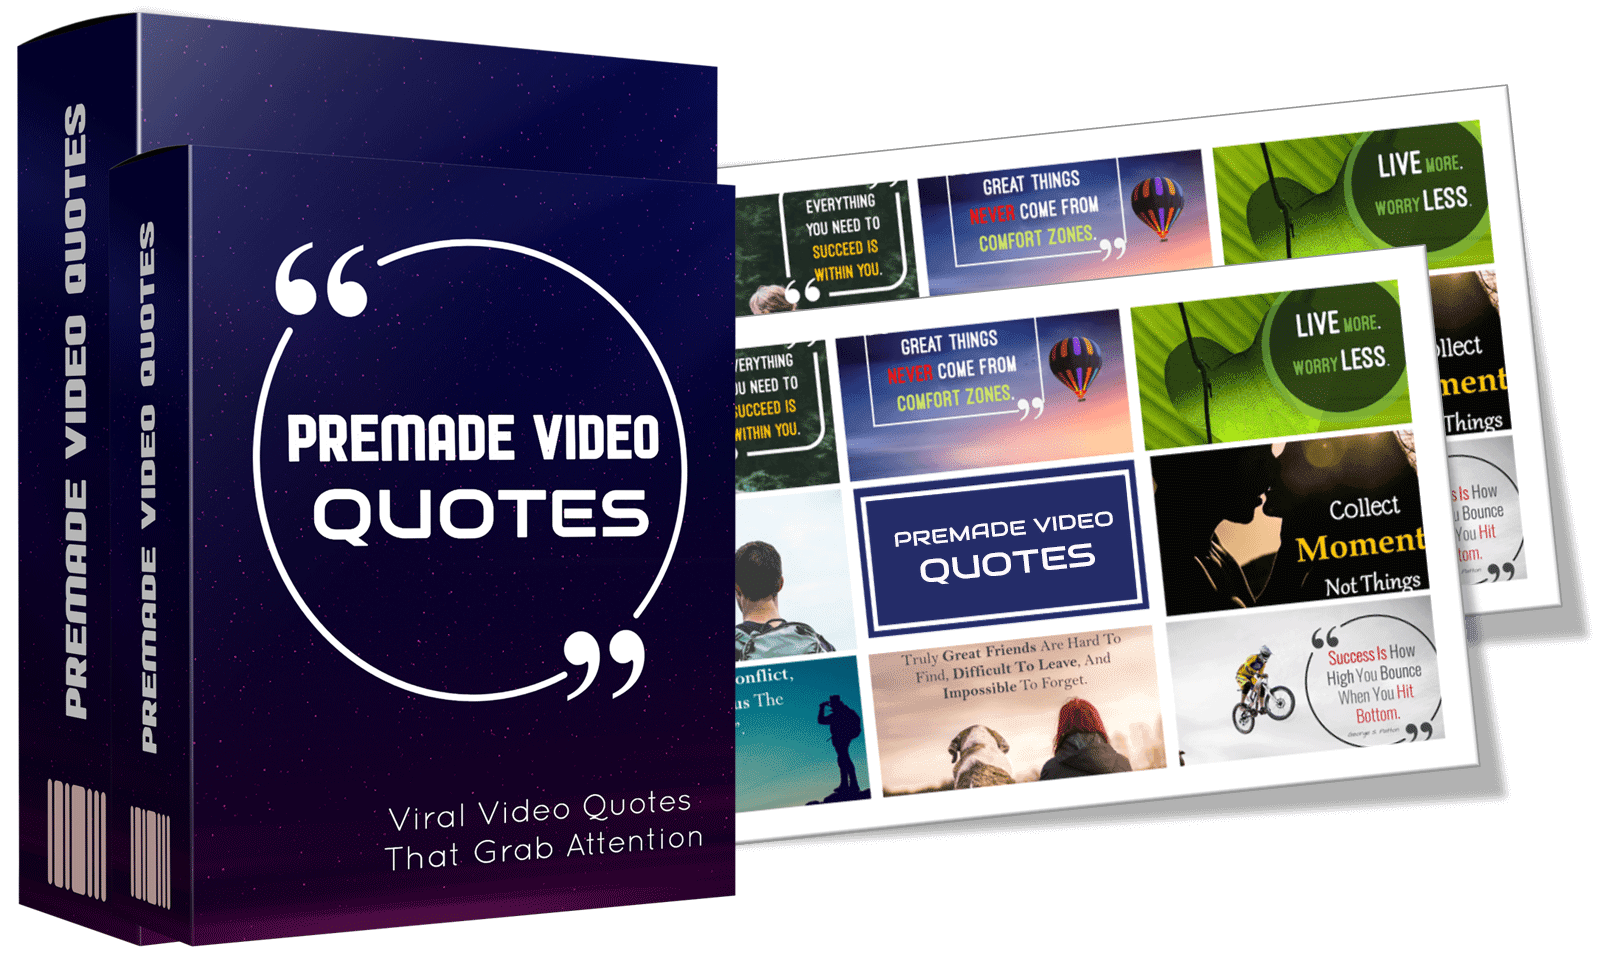 Premade Video Quotes Graphic2